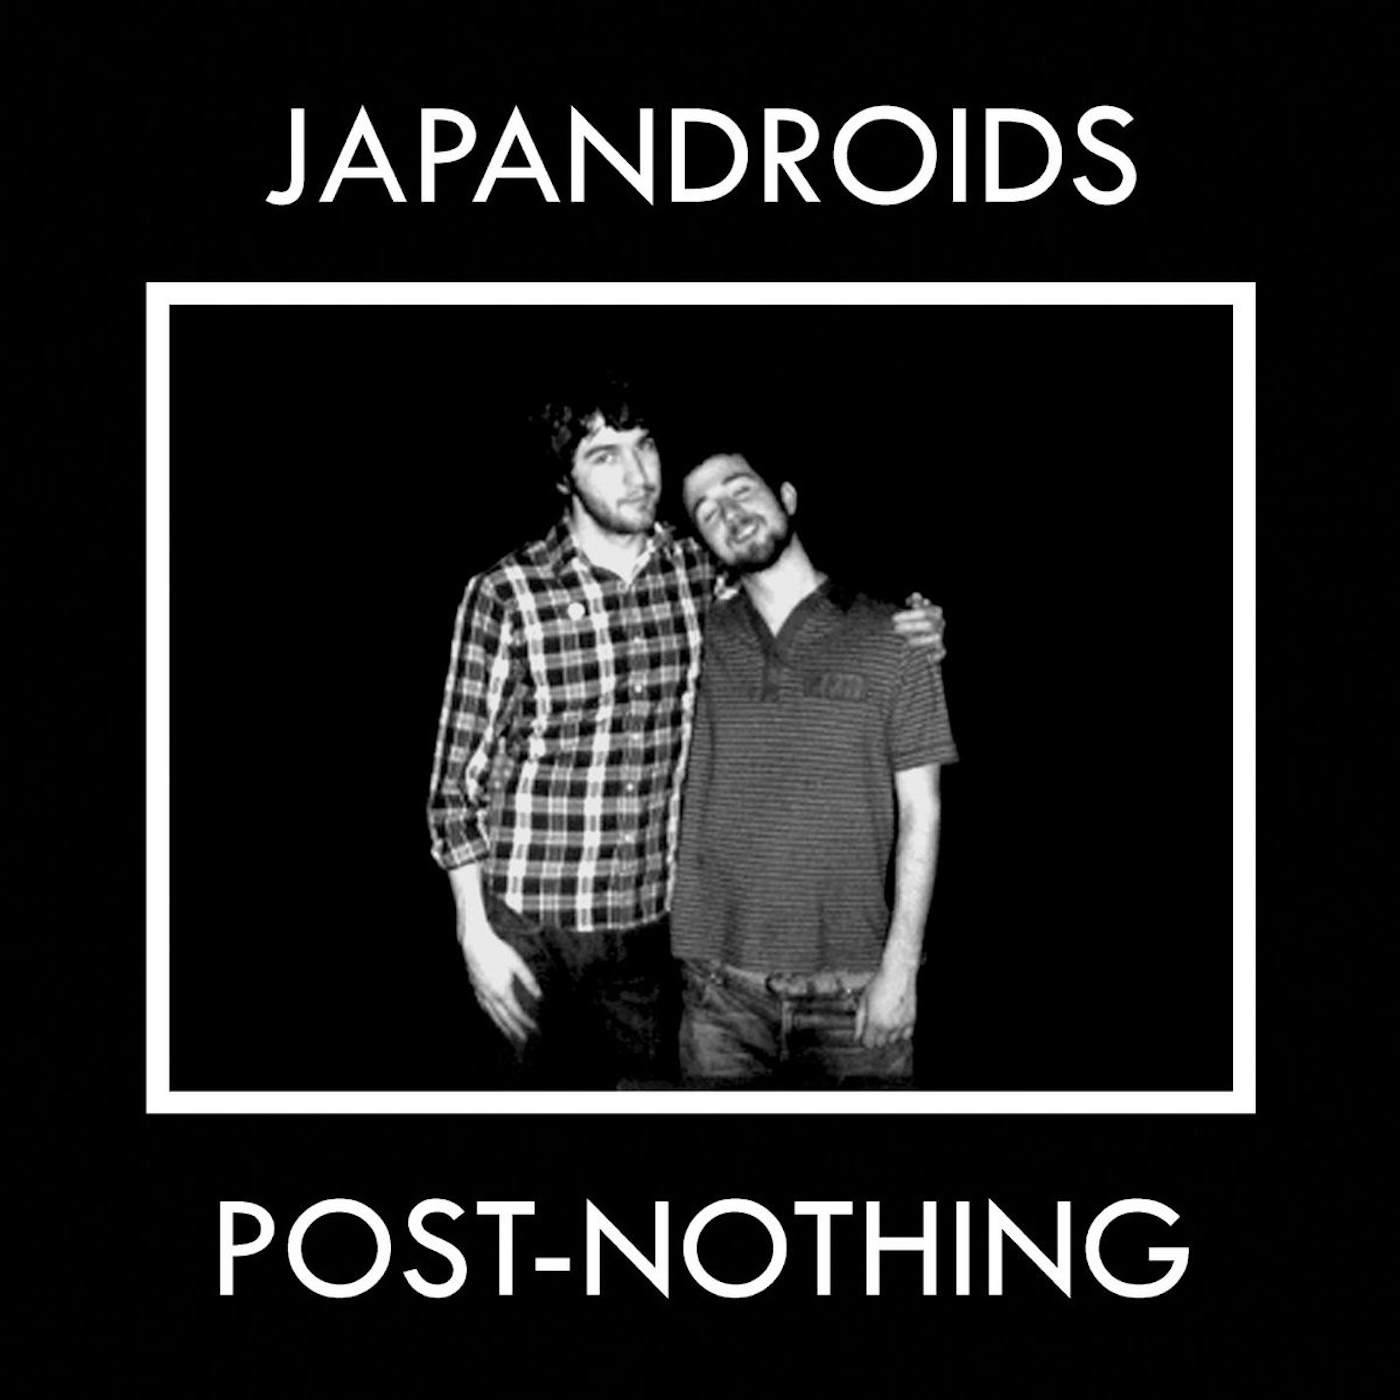 Japandroids POST NOTHING Vinyl Record